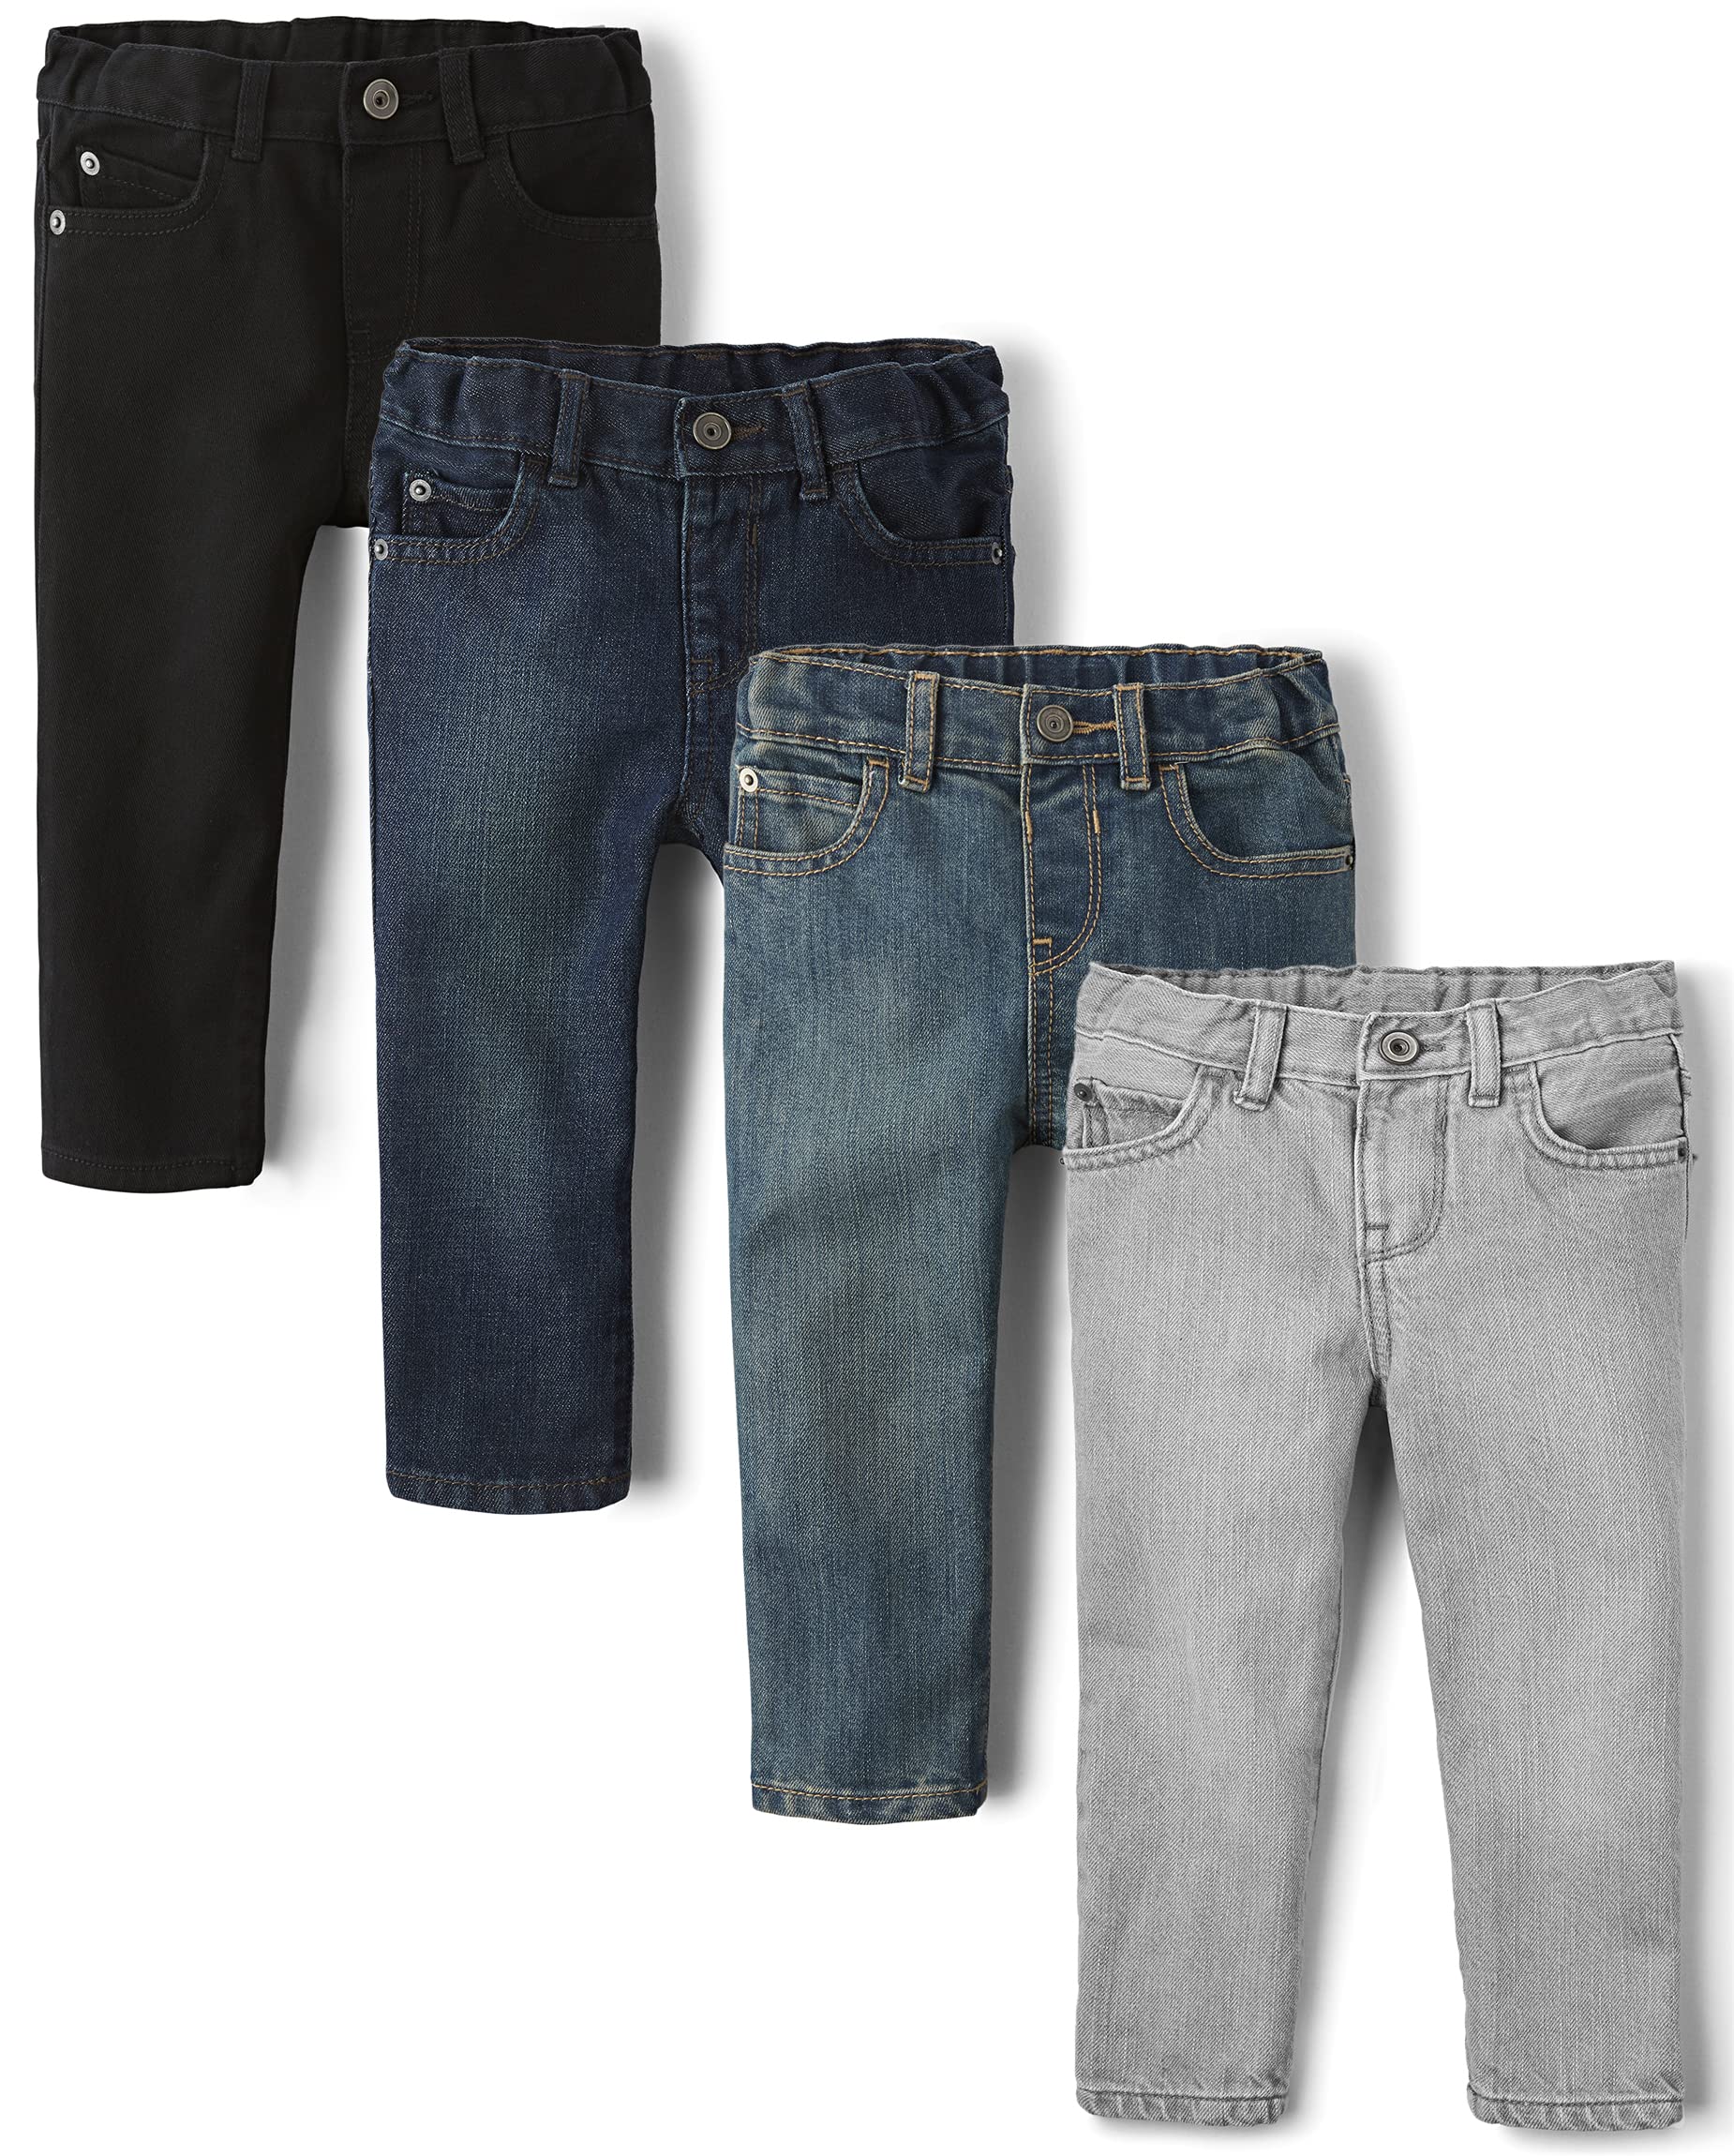 The Children's Place Baby Boys' Single and Toddler Skinny Jeans